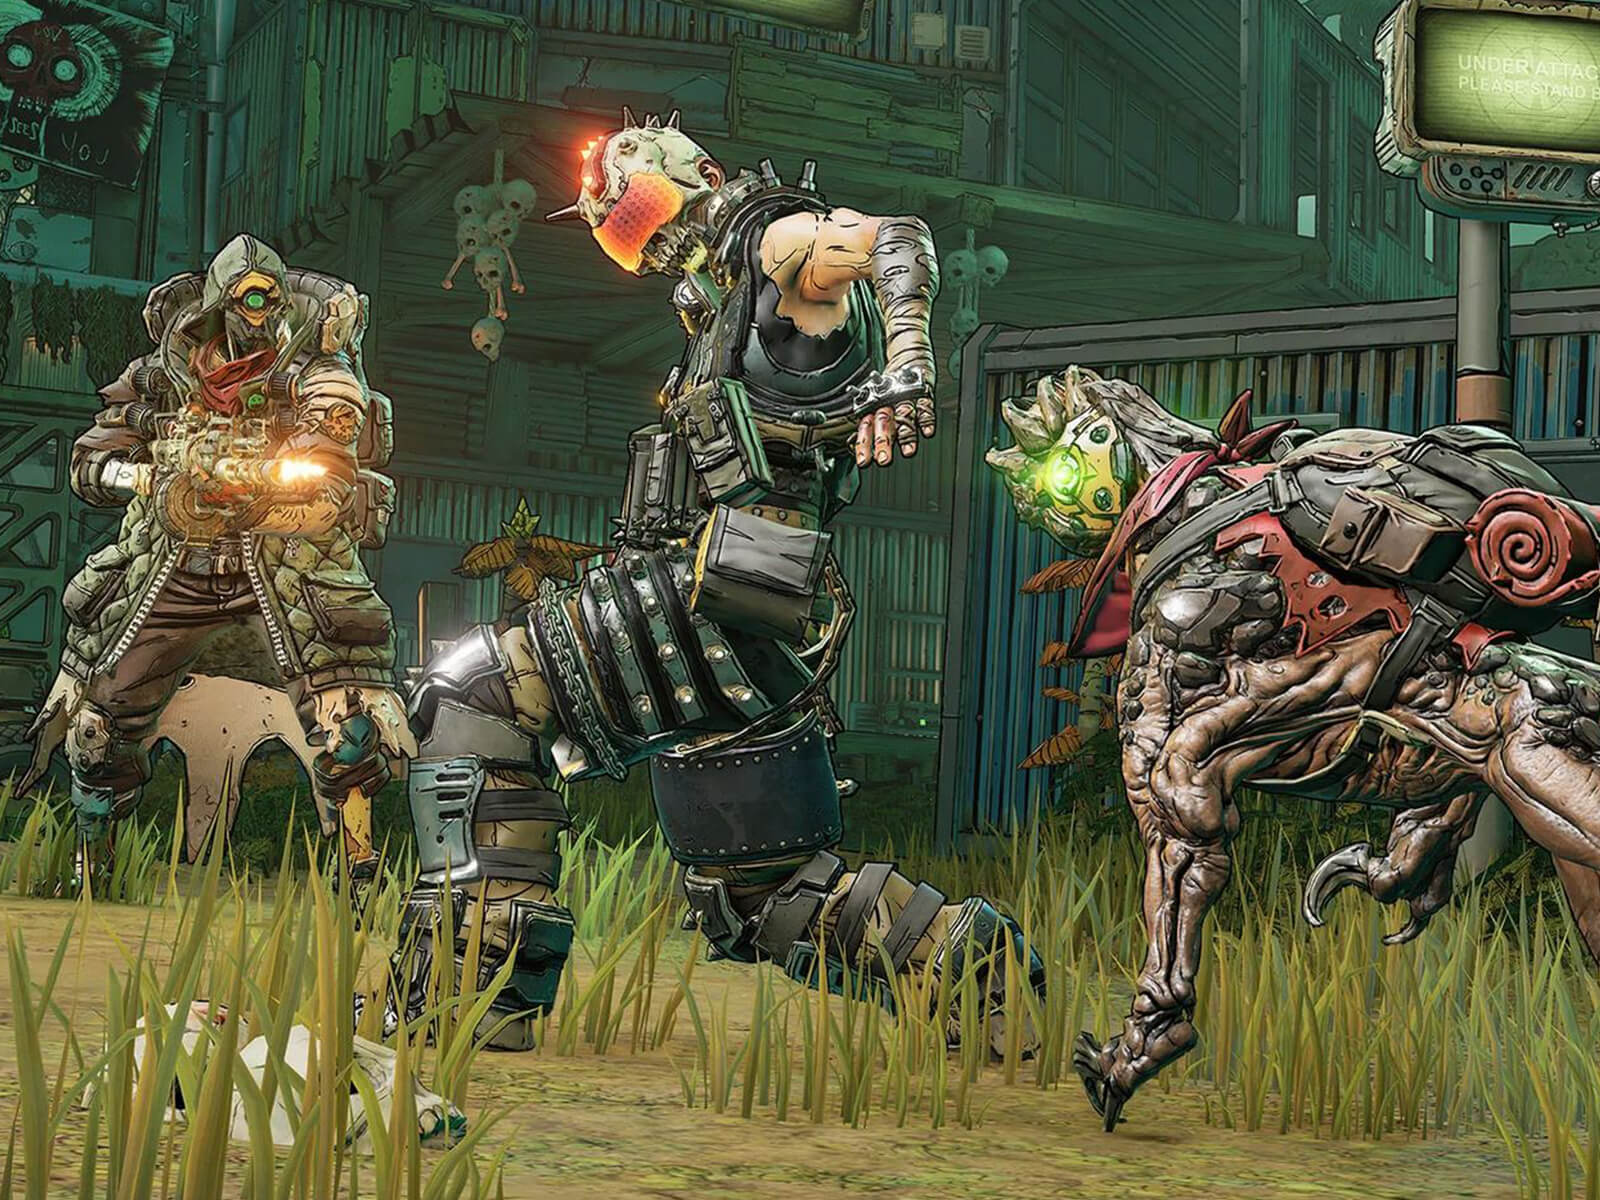 Borderlands 3 character FL4K and their dog companion surround an enemy.